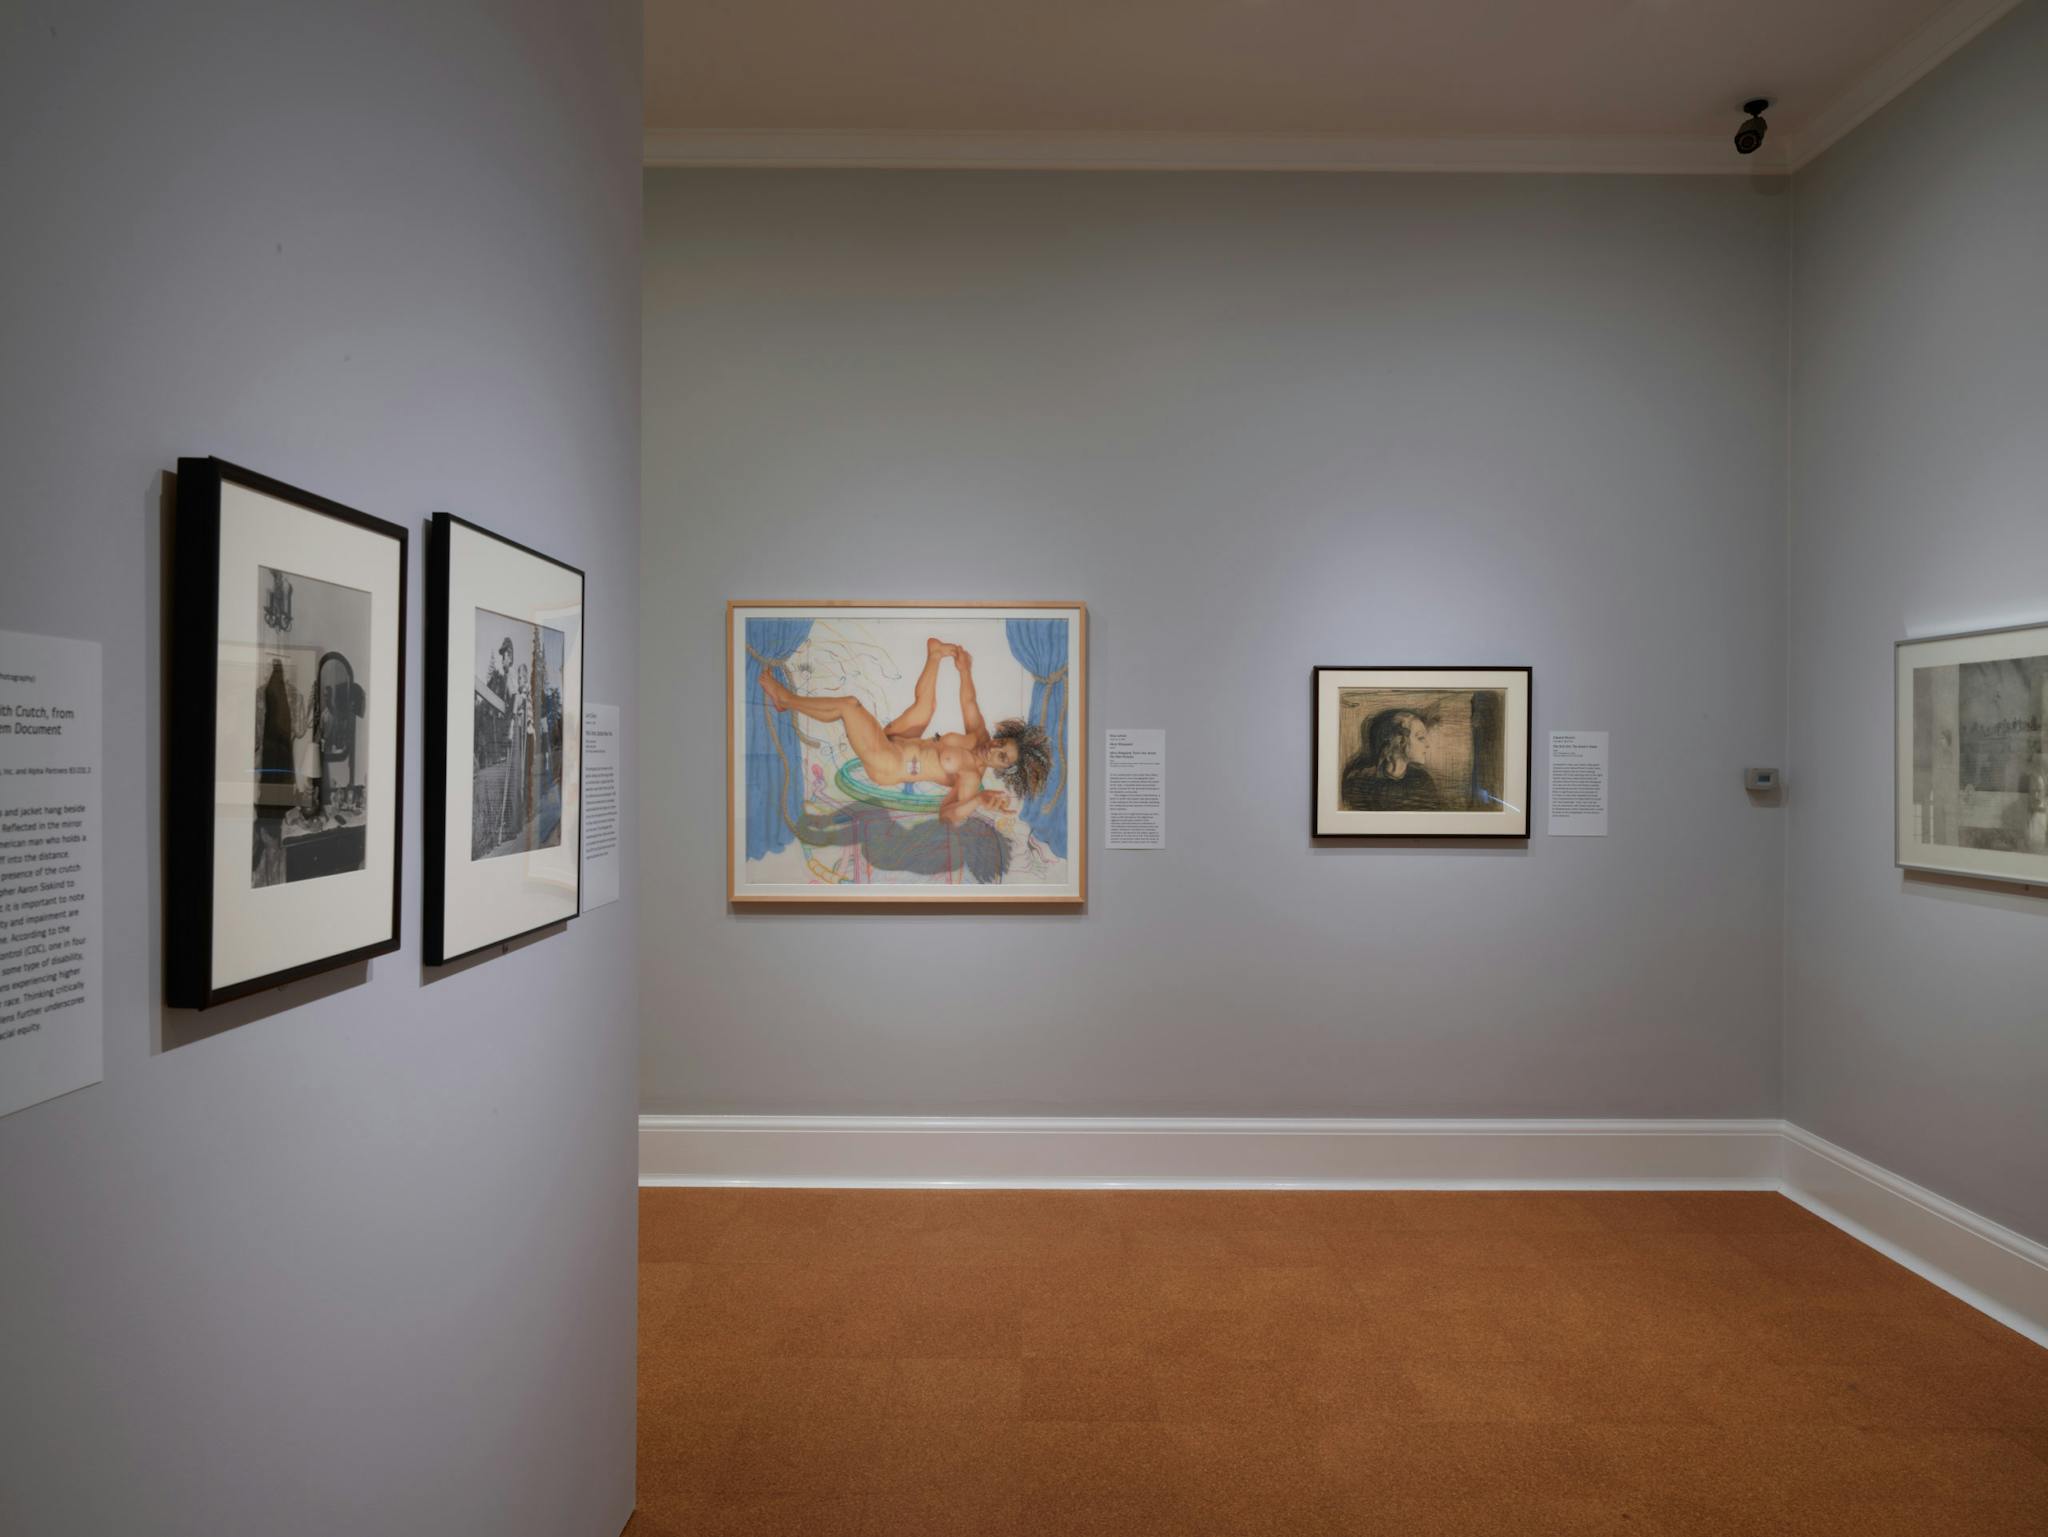 Photographs and other works of art displayed on the gray walls of the RISD Museum.